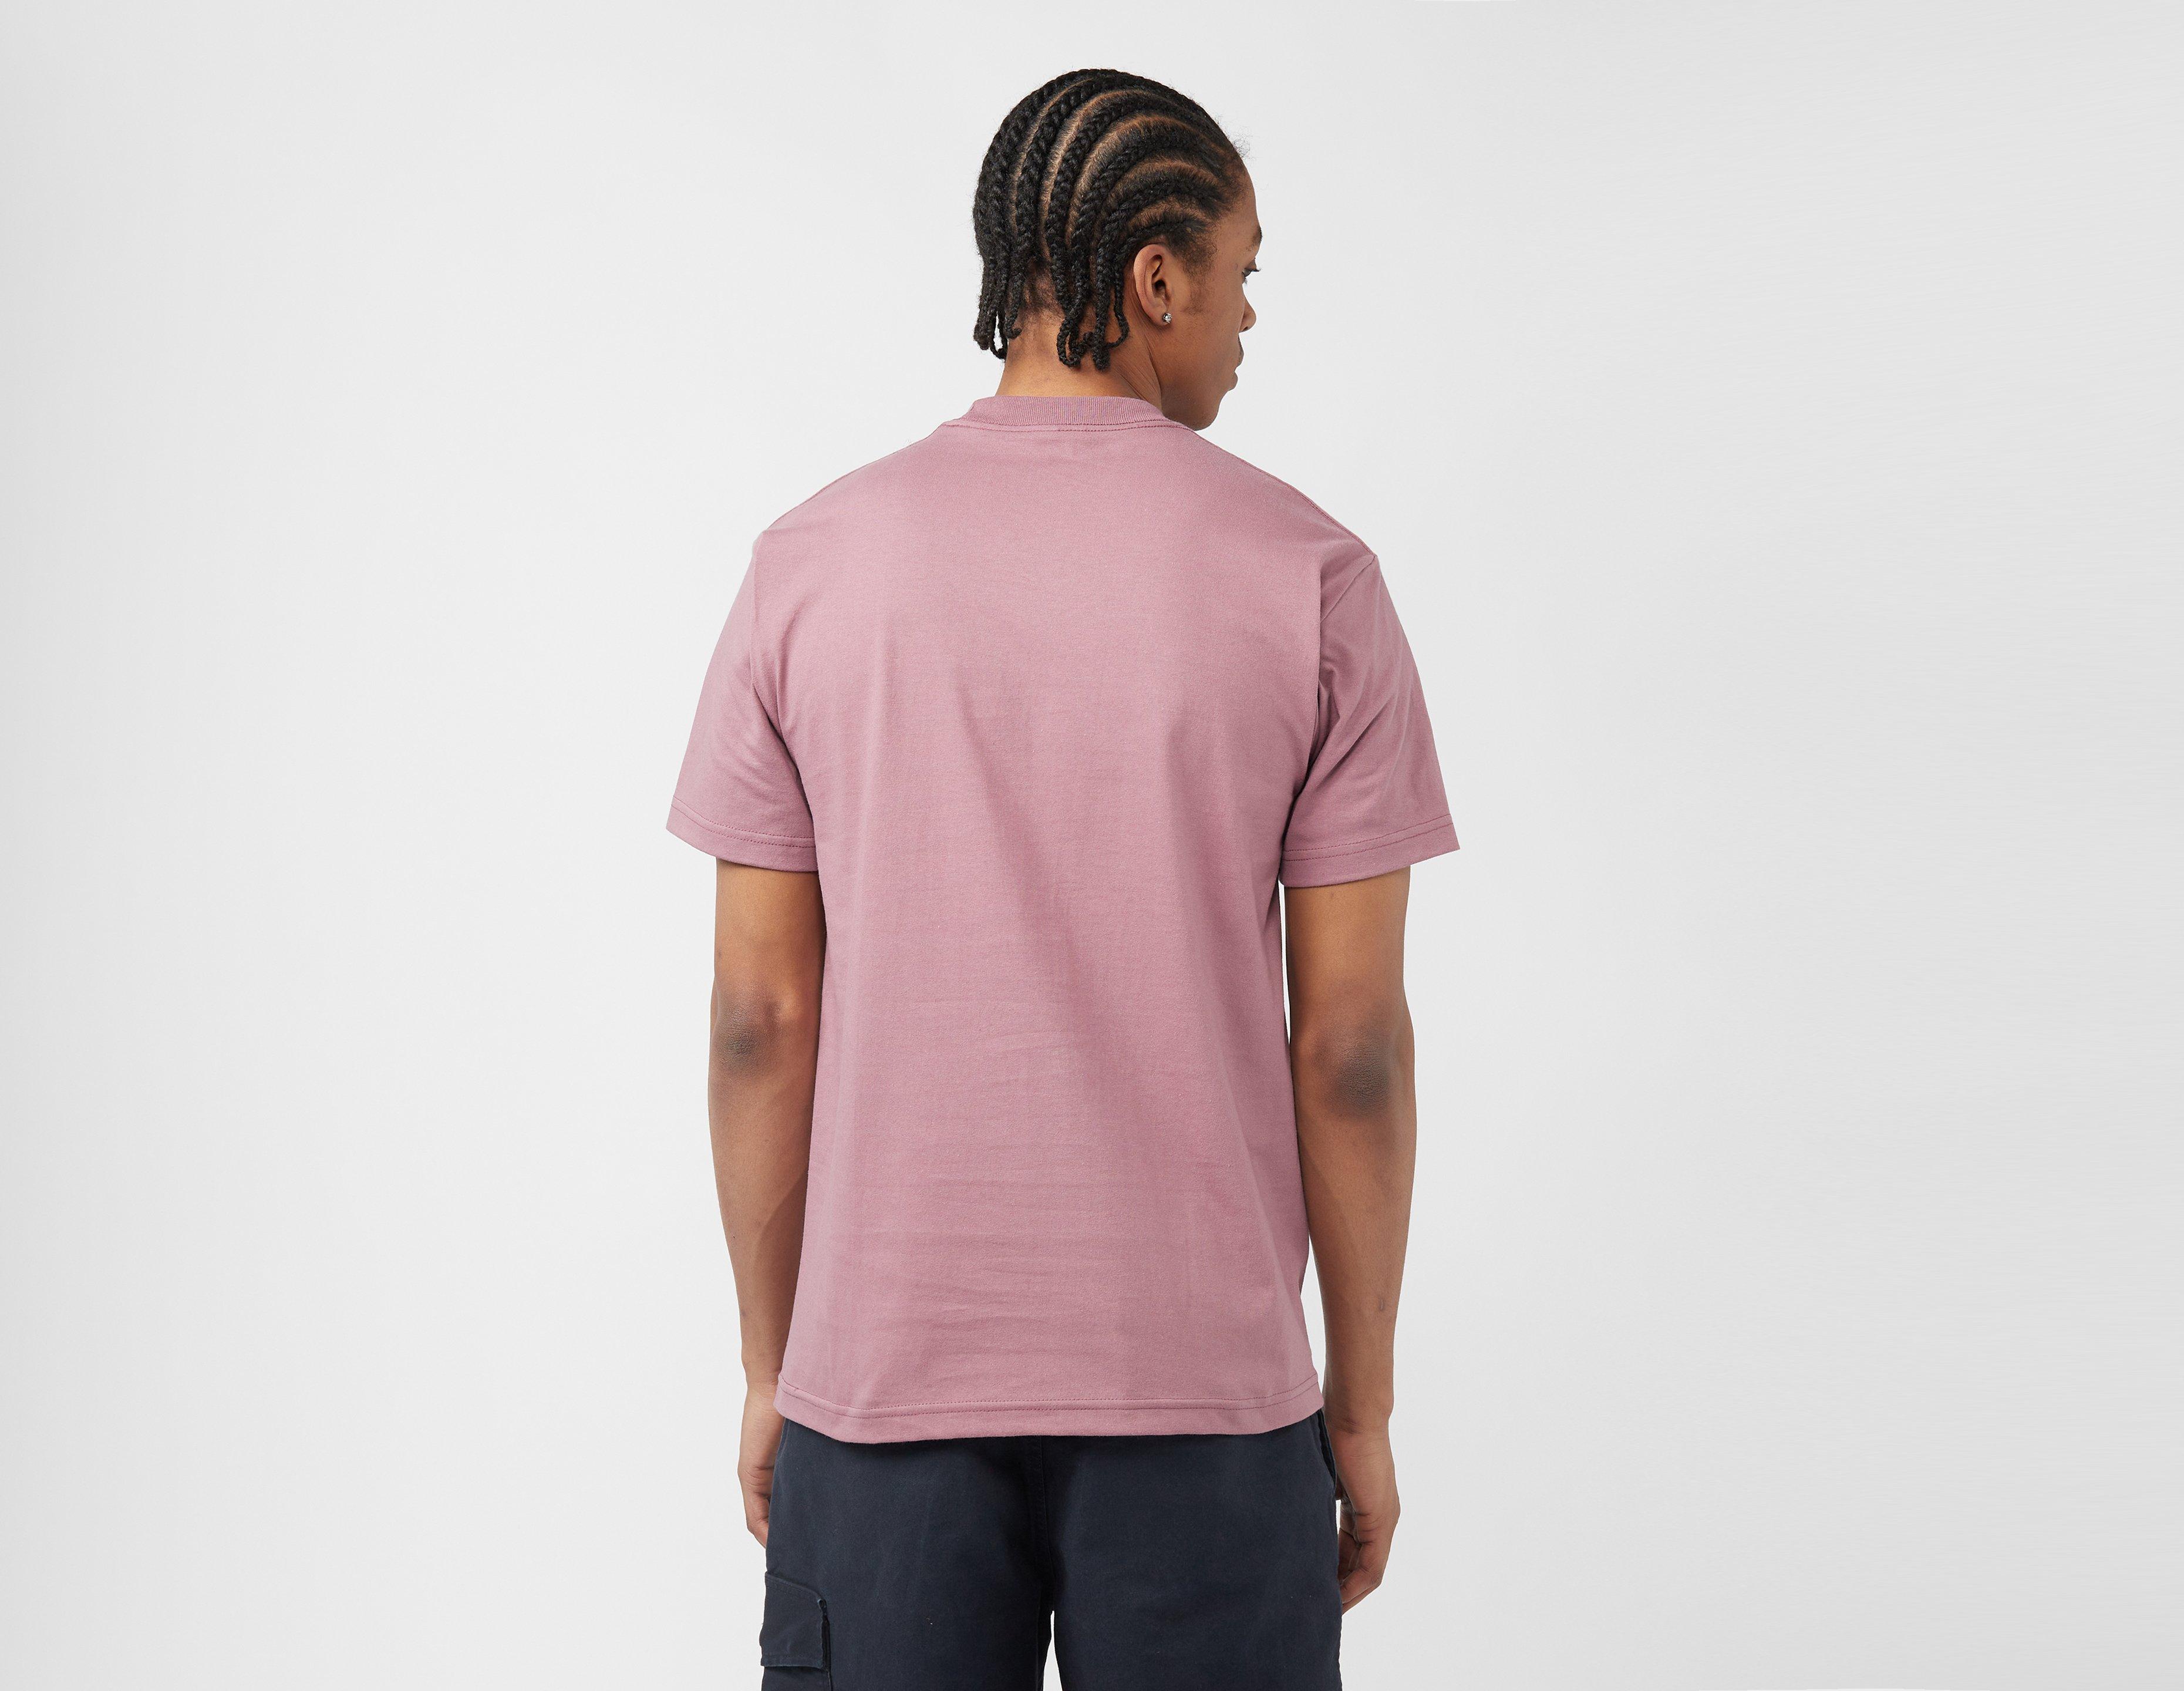 Healthdesign? | Shirt - Pink unchained Huf acid wash Best in t- print Show In black T back - shirt